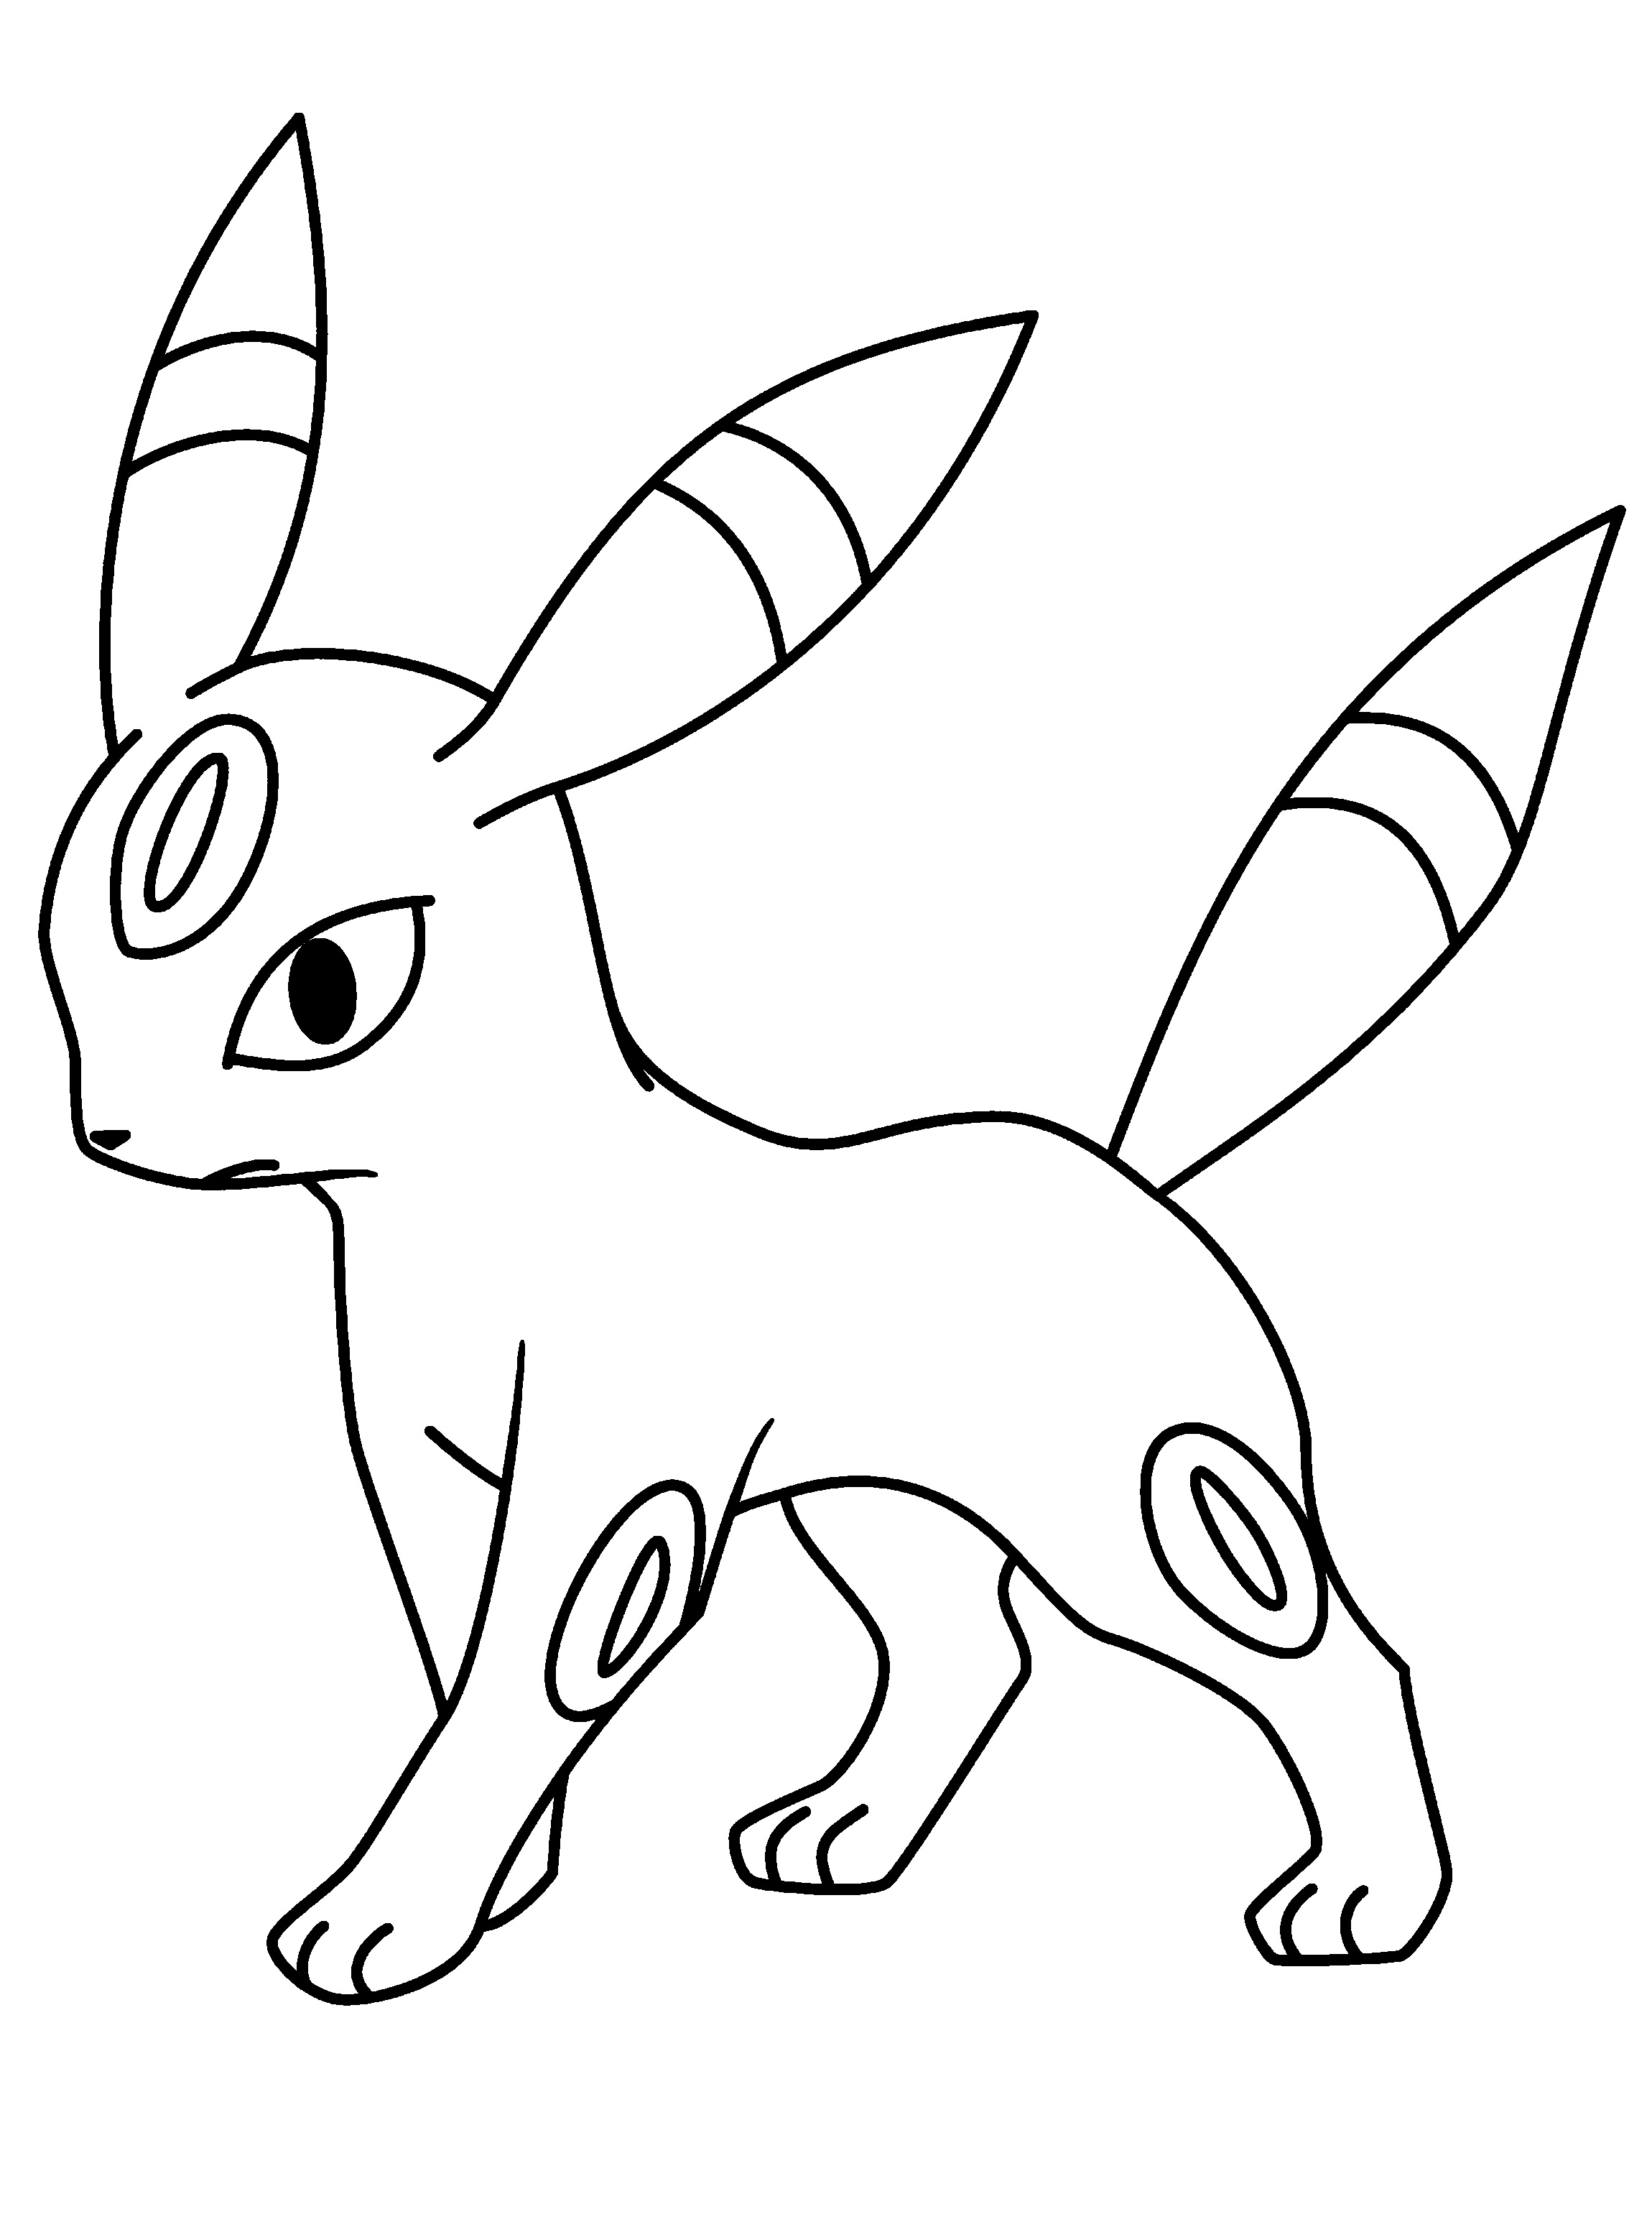 Umbreon Coloring Pages Printable | Activity Shelter